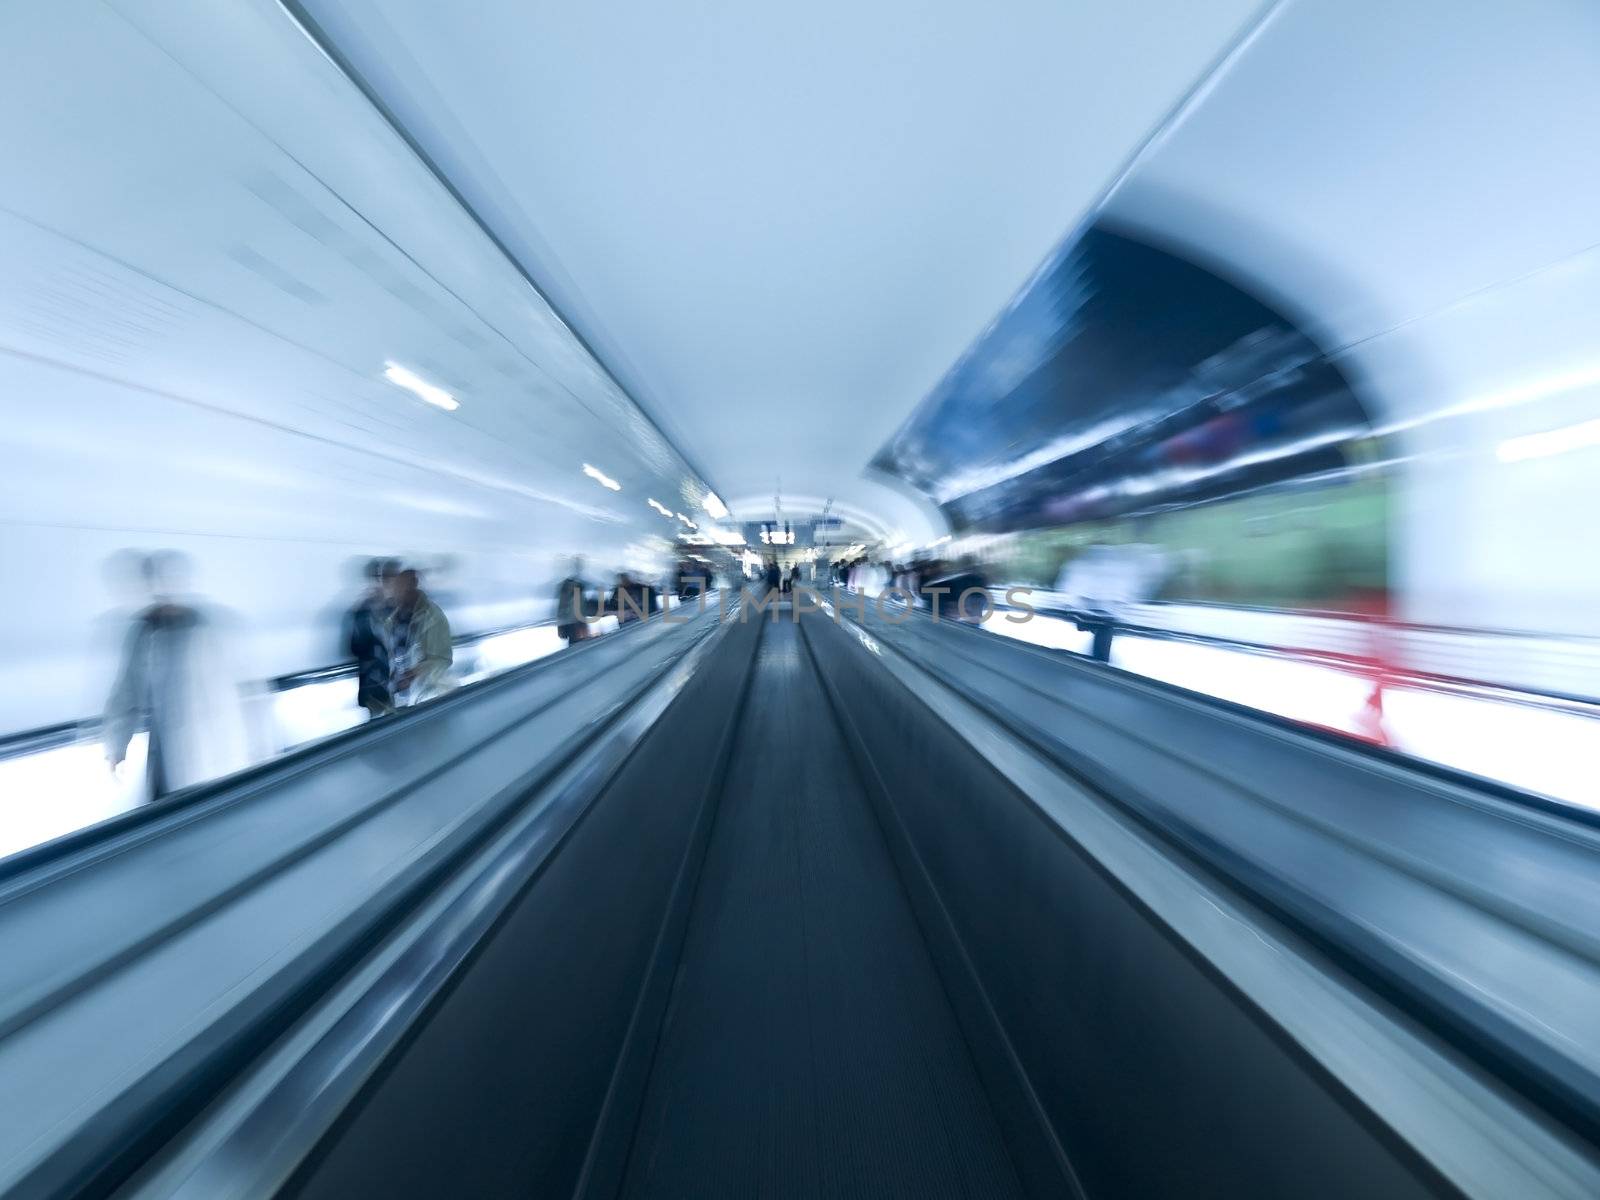 Futuristic image. Blurred people on the walkway tunnel. Empty center lane.